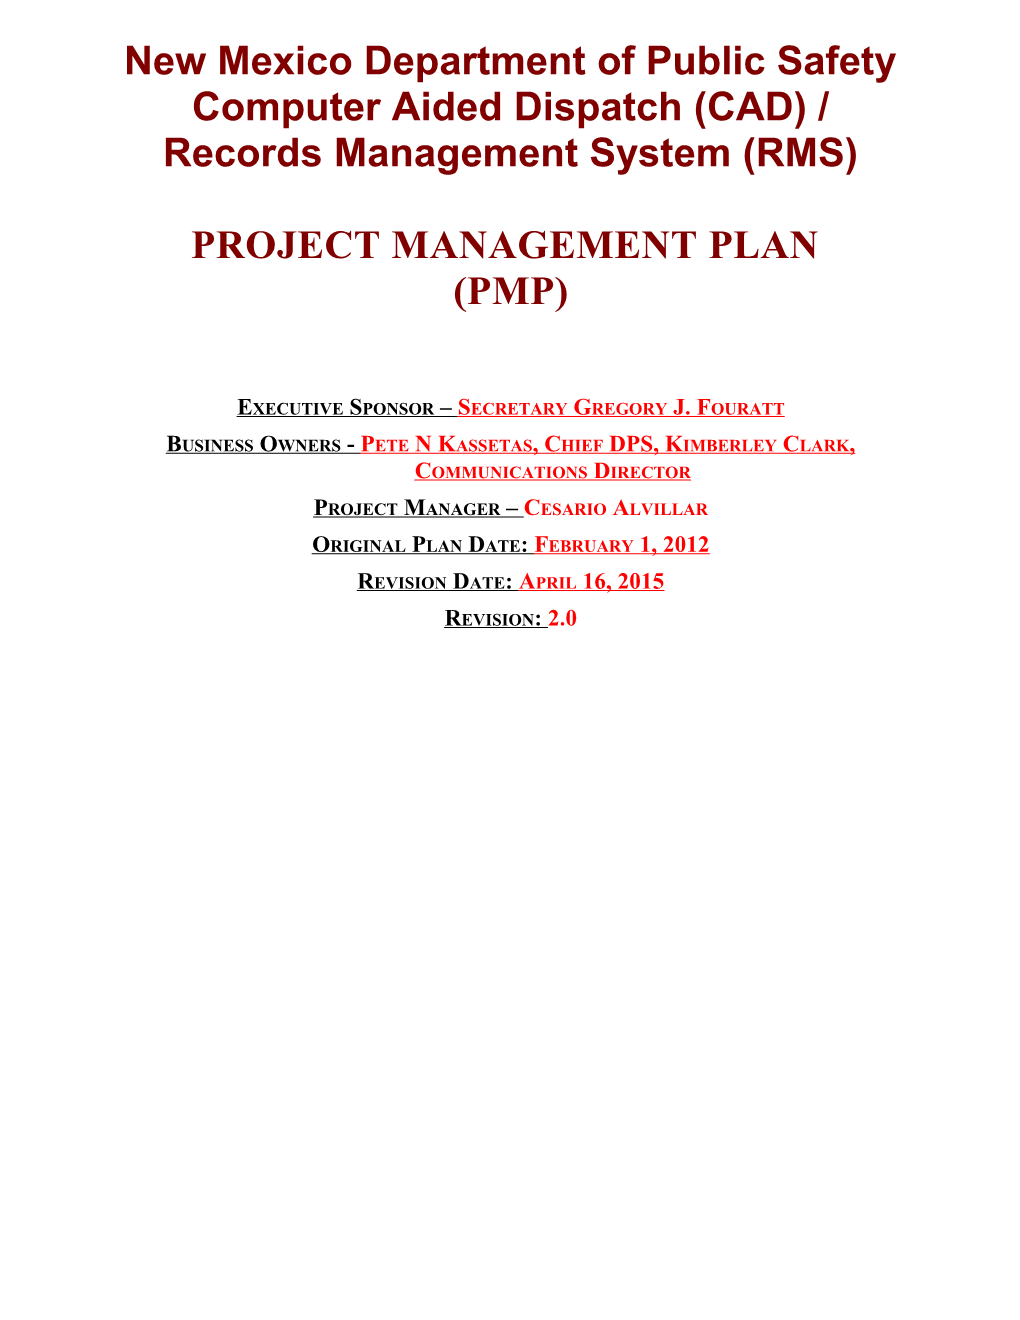 Project Management Plan for COMPUTER Aided Dispatching System